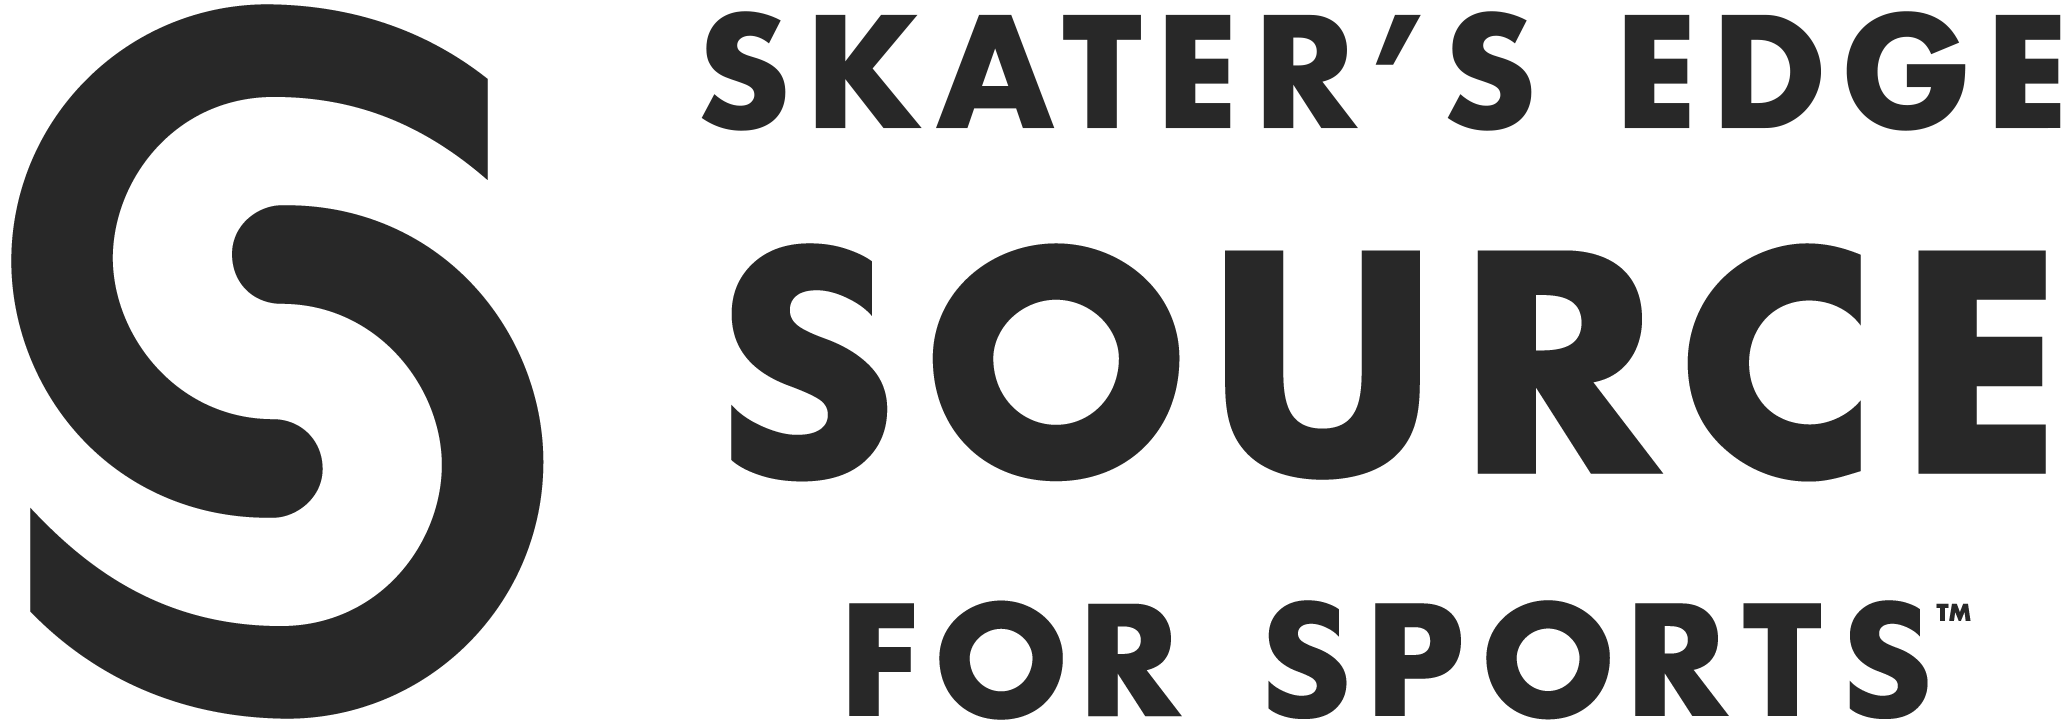 Skater's Edge Source for Sports